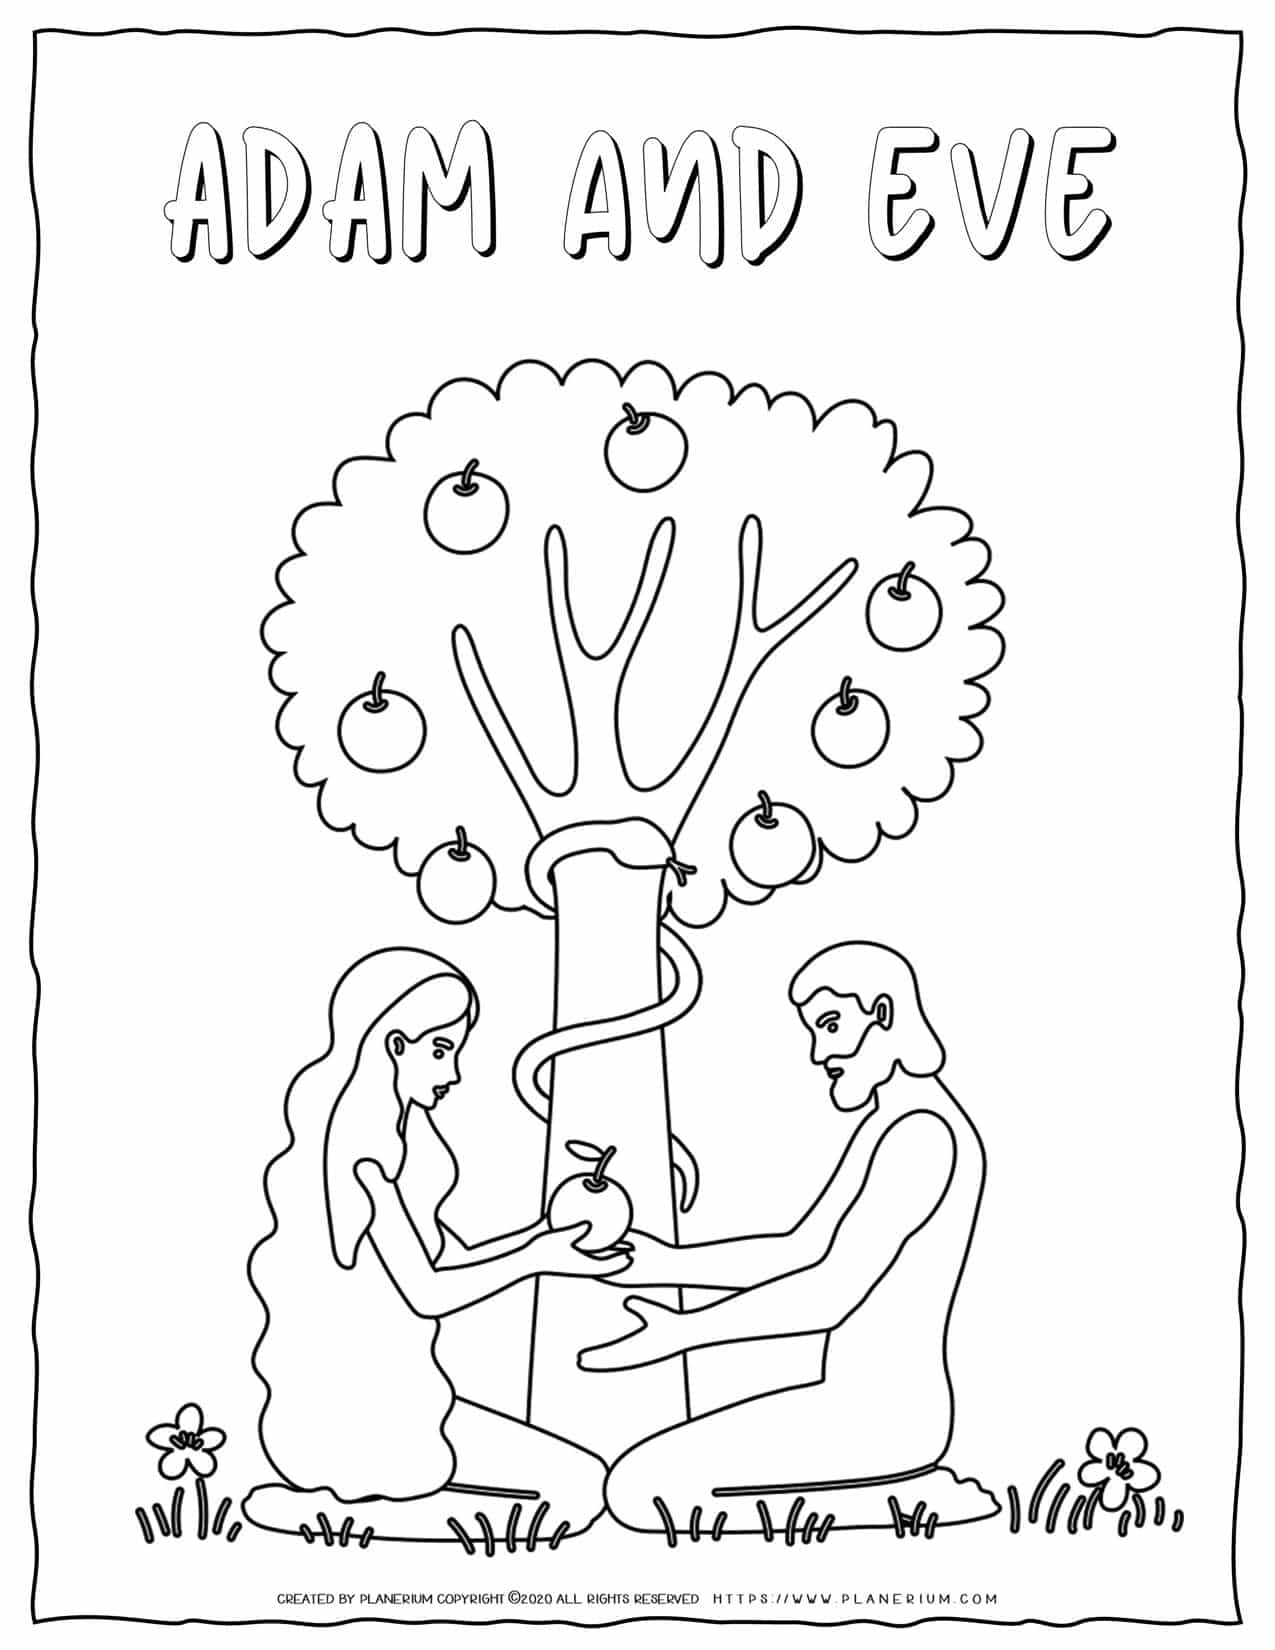 Adam and Eve   Bible Coloring Pages   Planerium